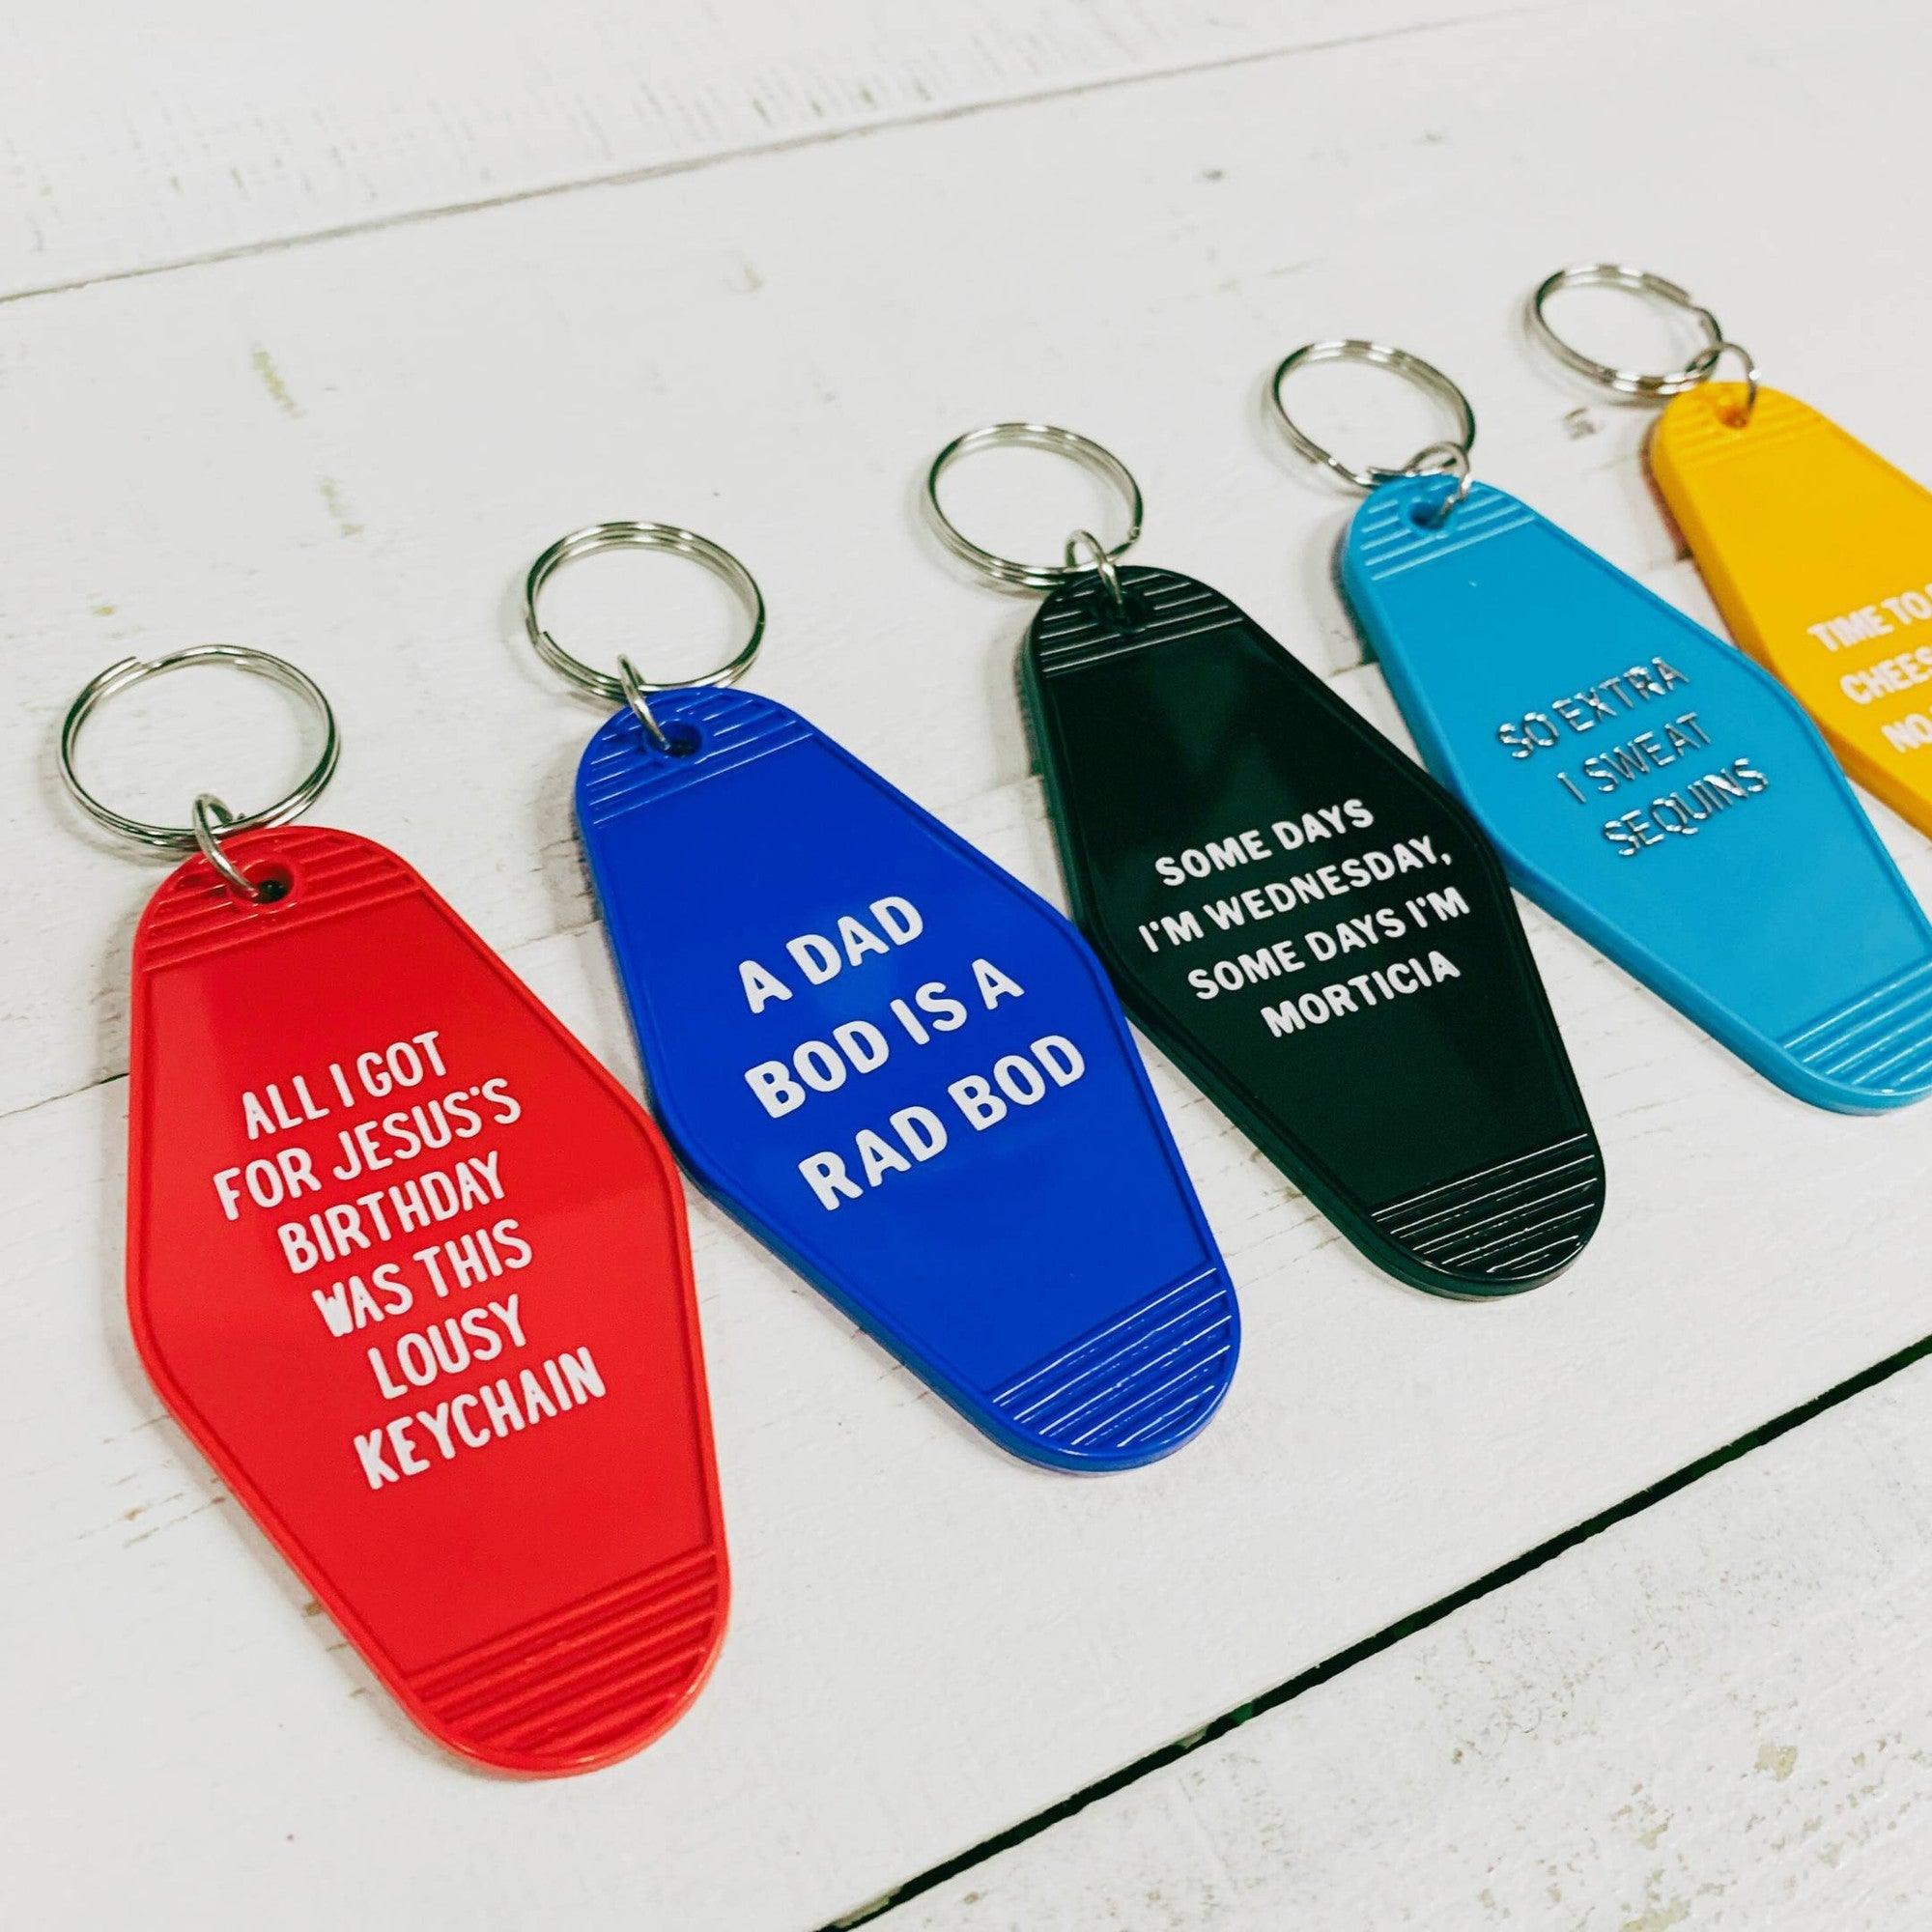 A Dad Bod is a Rad Bod Motel Style Keychain in Blue | Body Positivity Themed Funny Key Tag | Gift for Him | Amazing Pinatas 